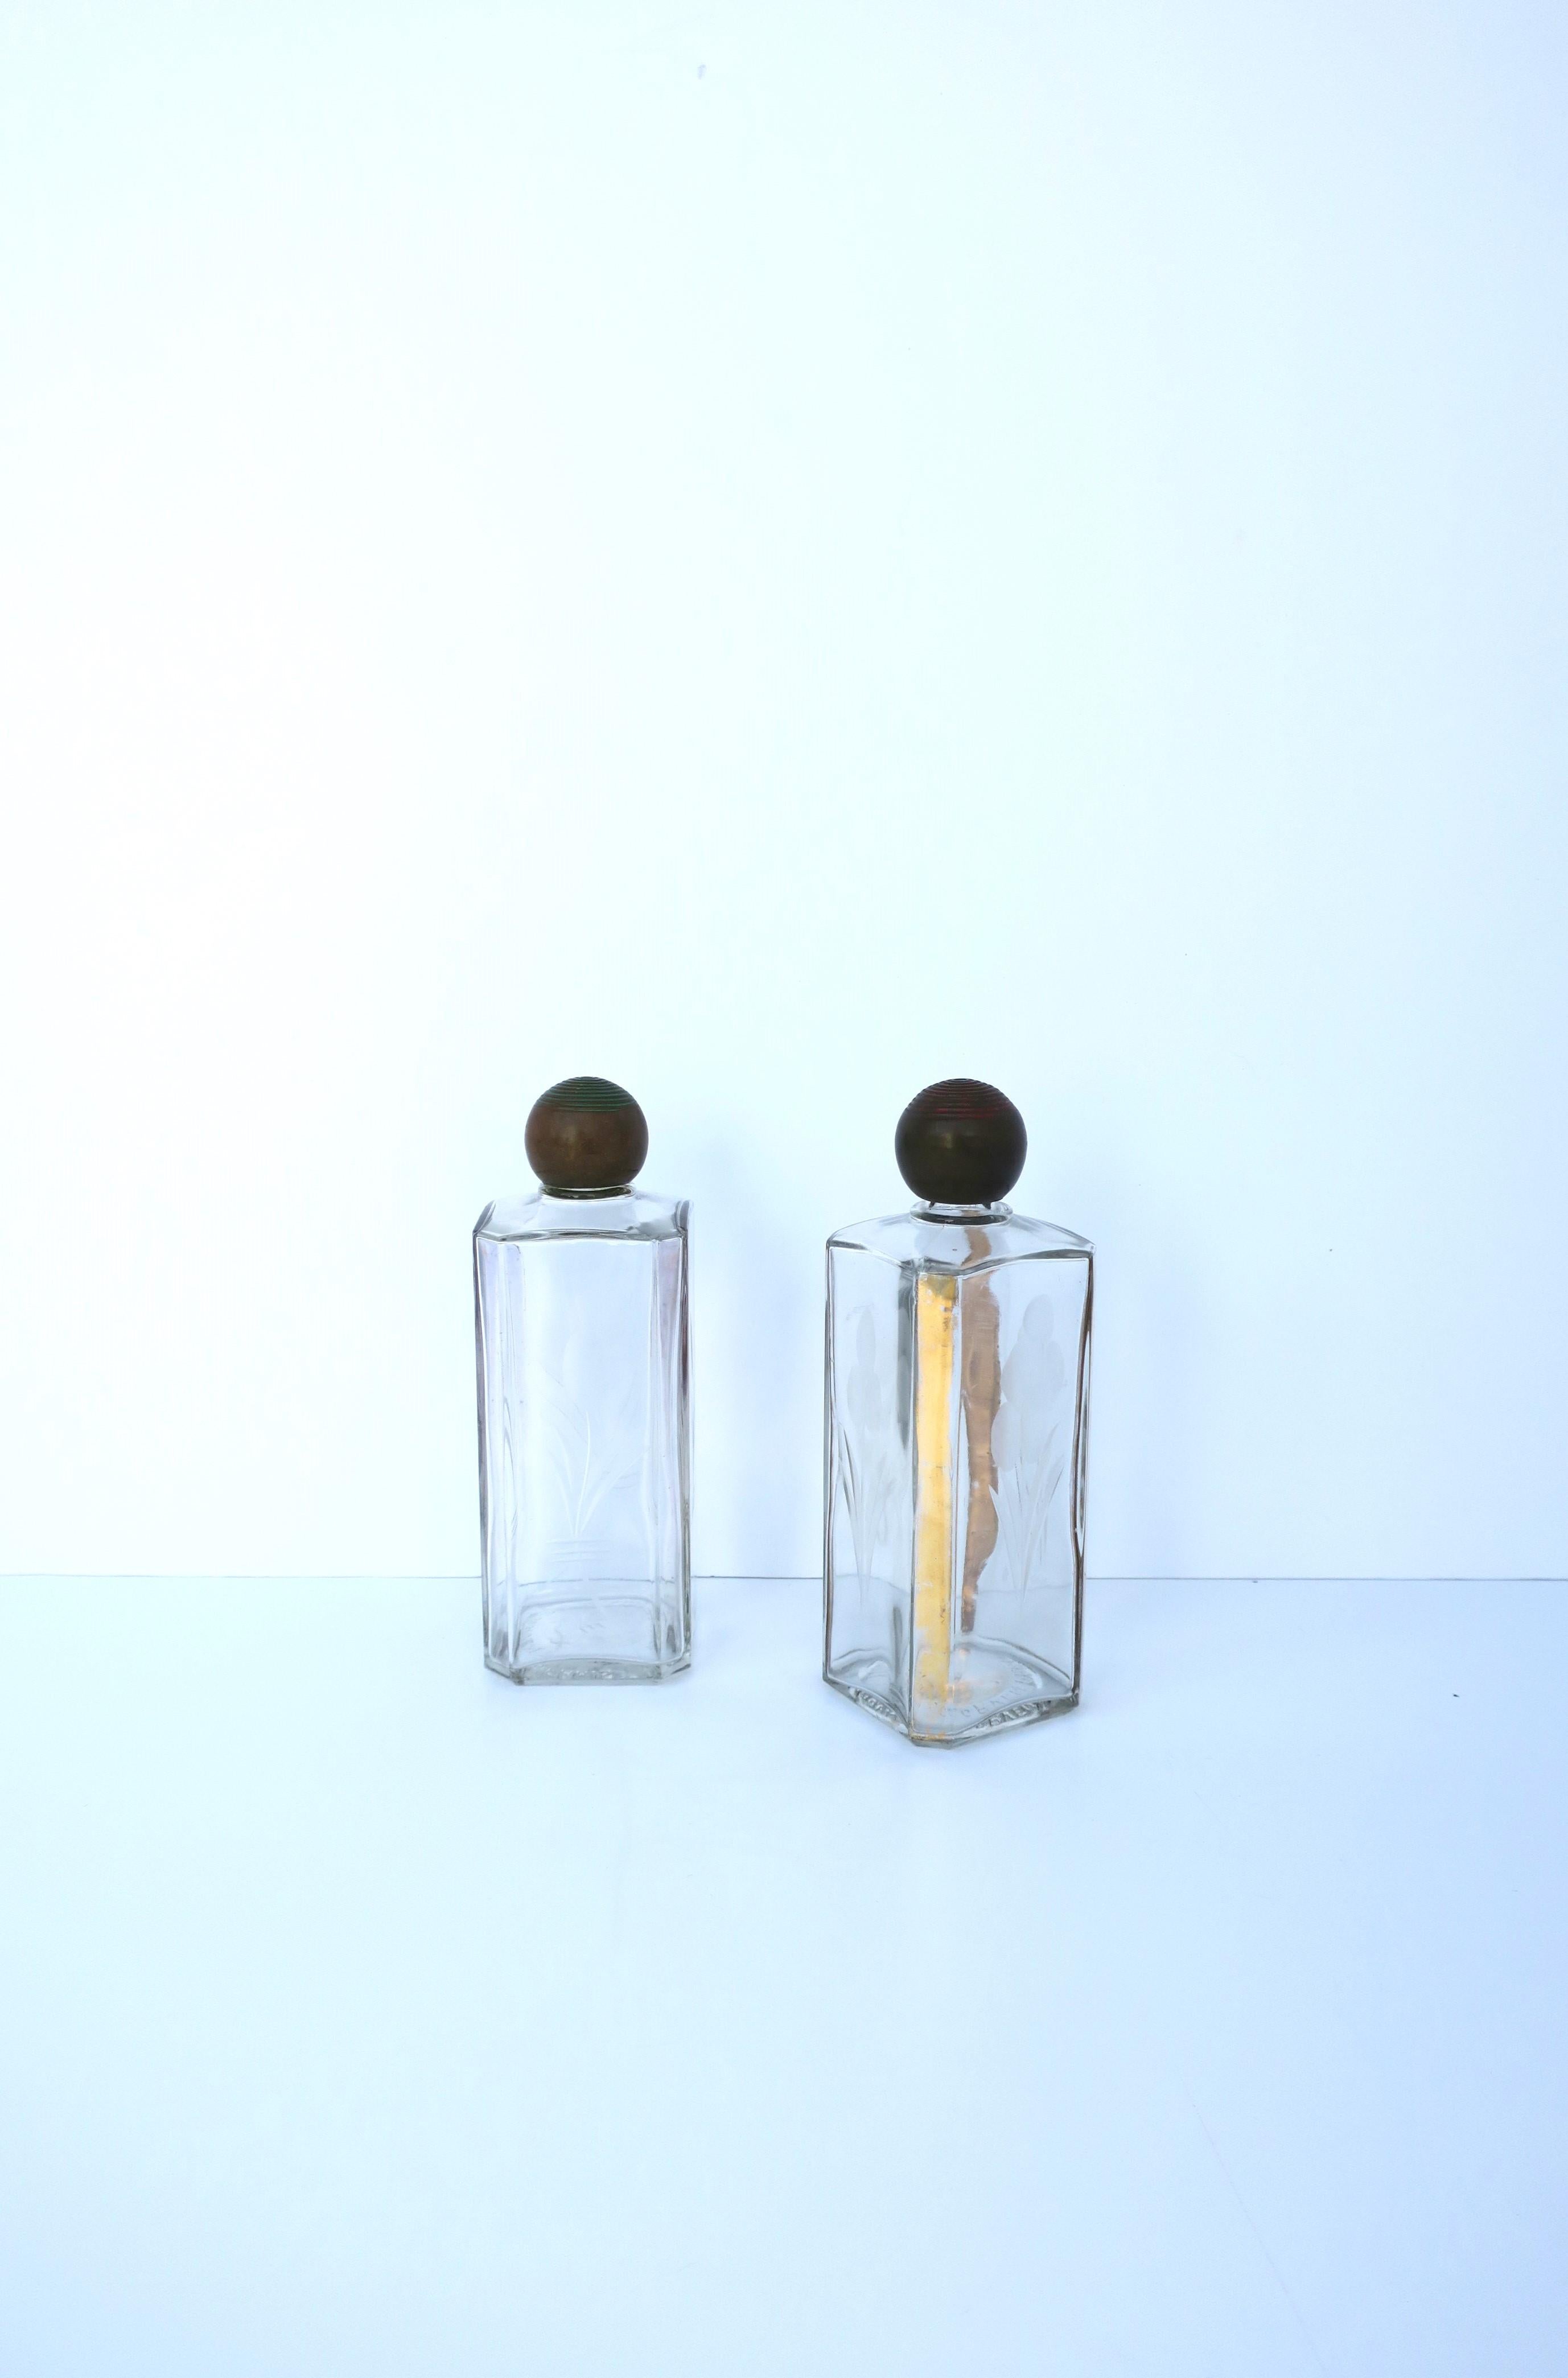 Mid-20th Century French Art Deco Glass Bottles from Paris, Pair For Sale